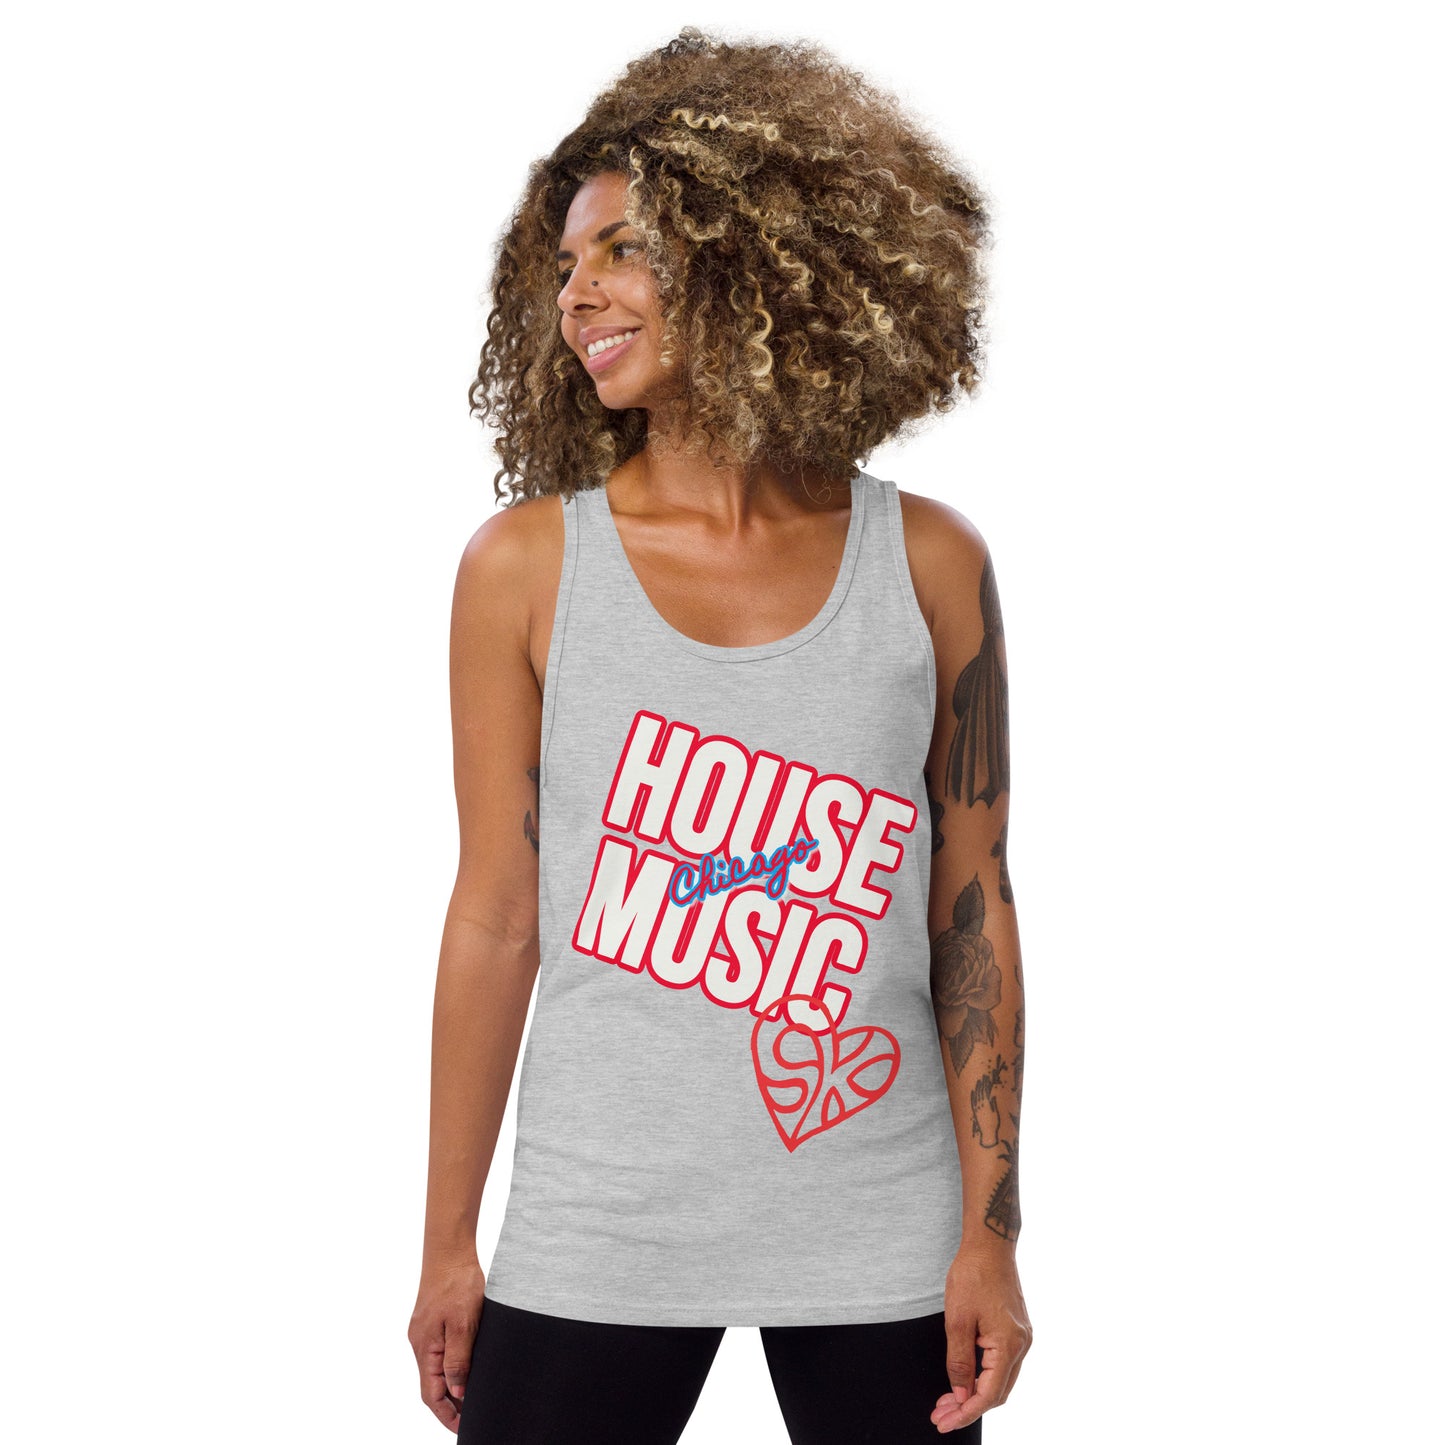 House Music Tank - White Letters